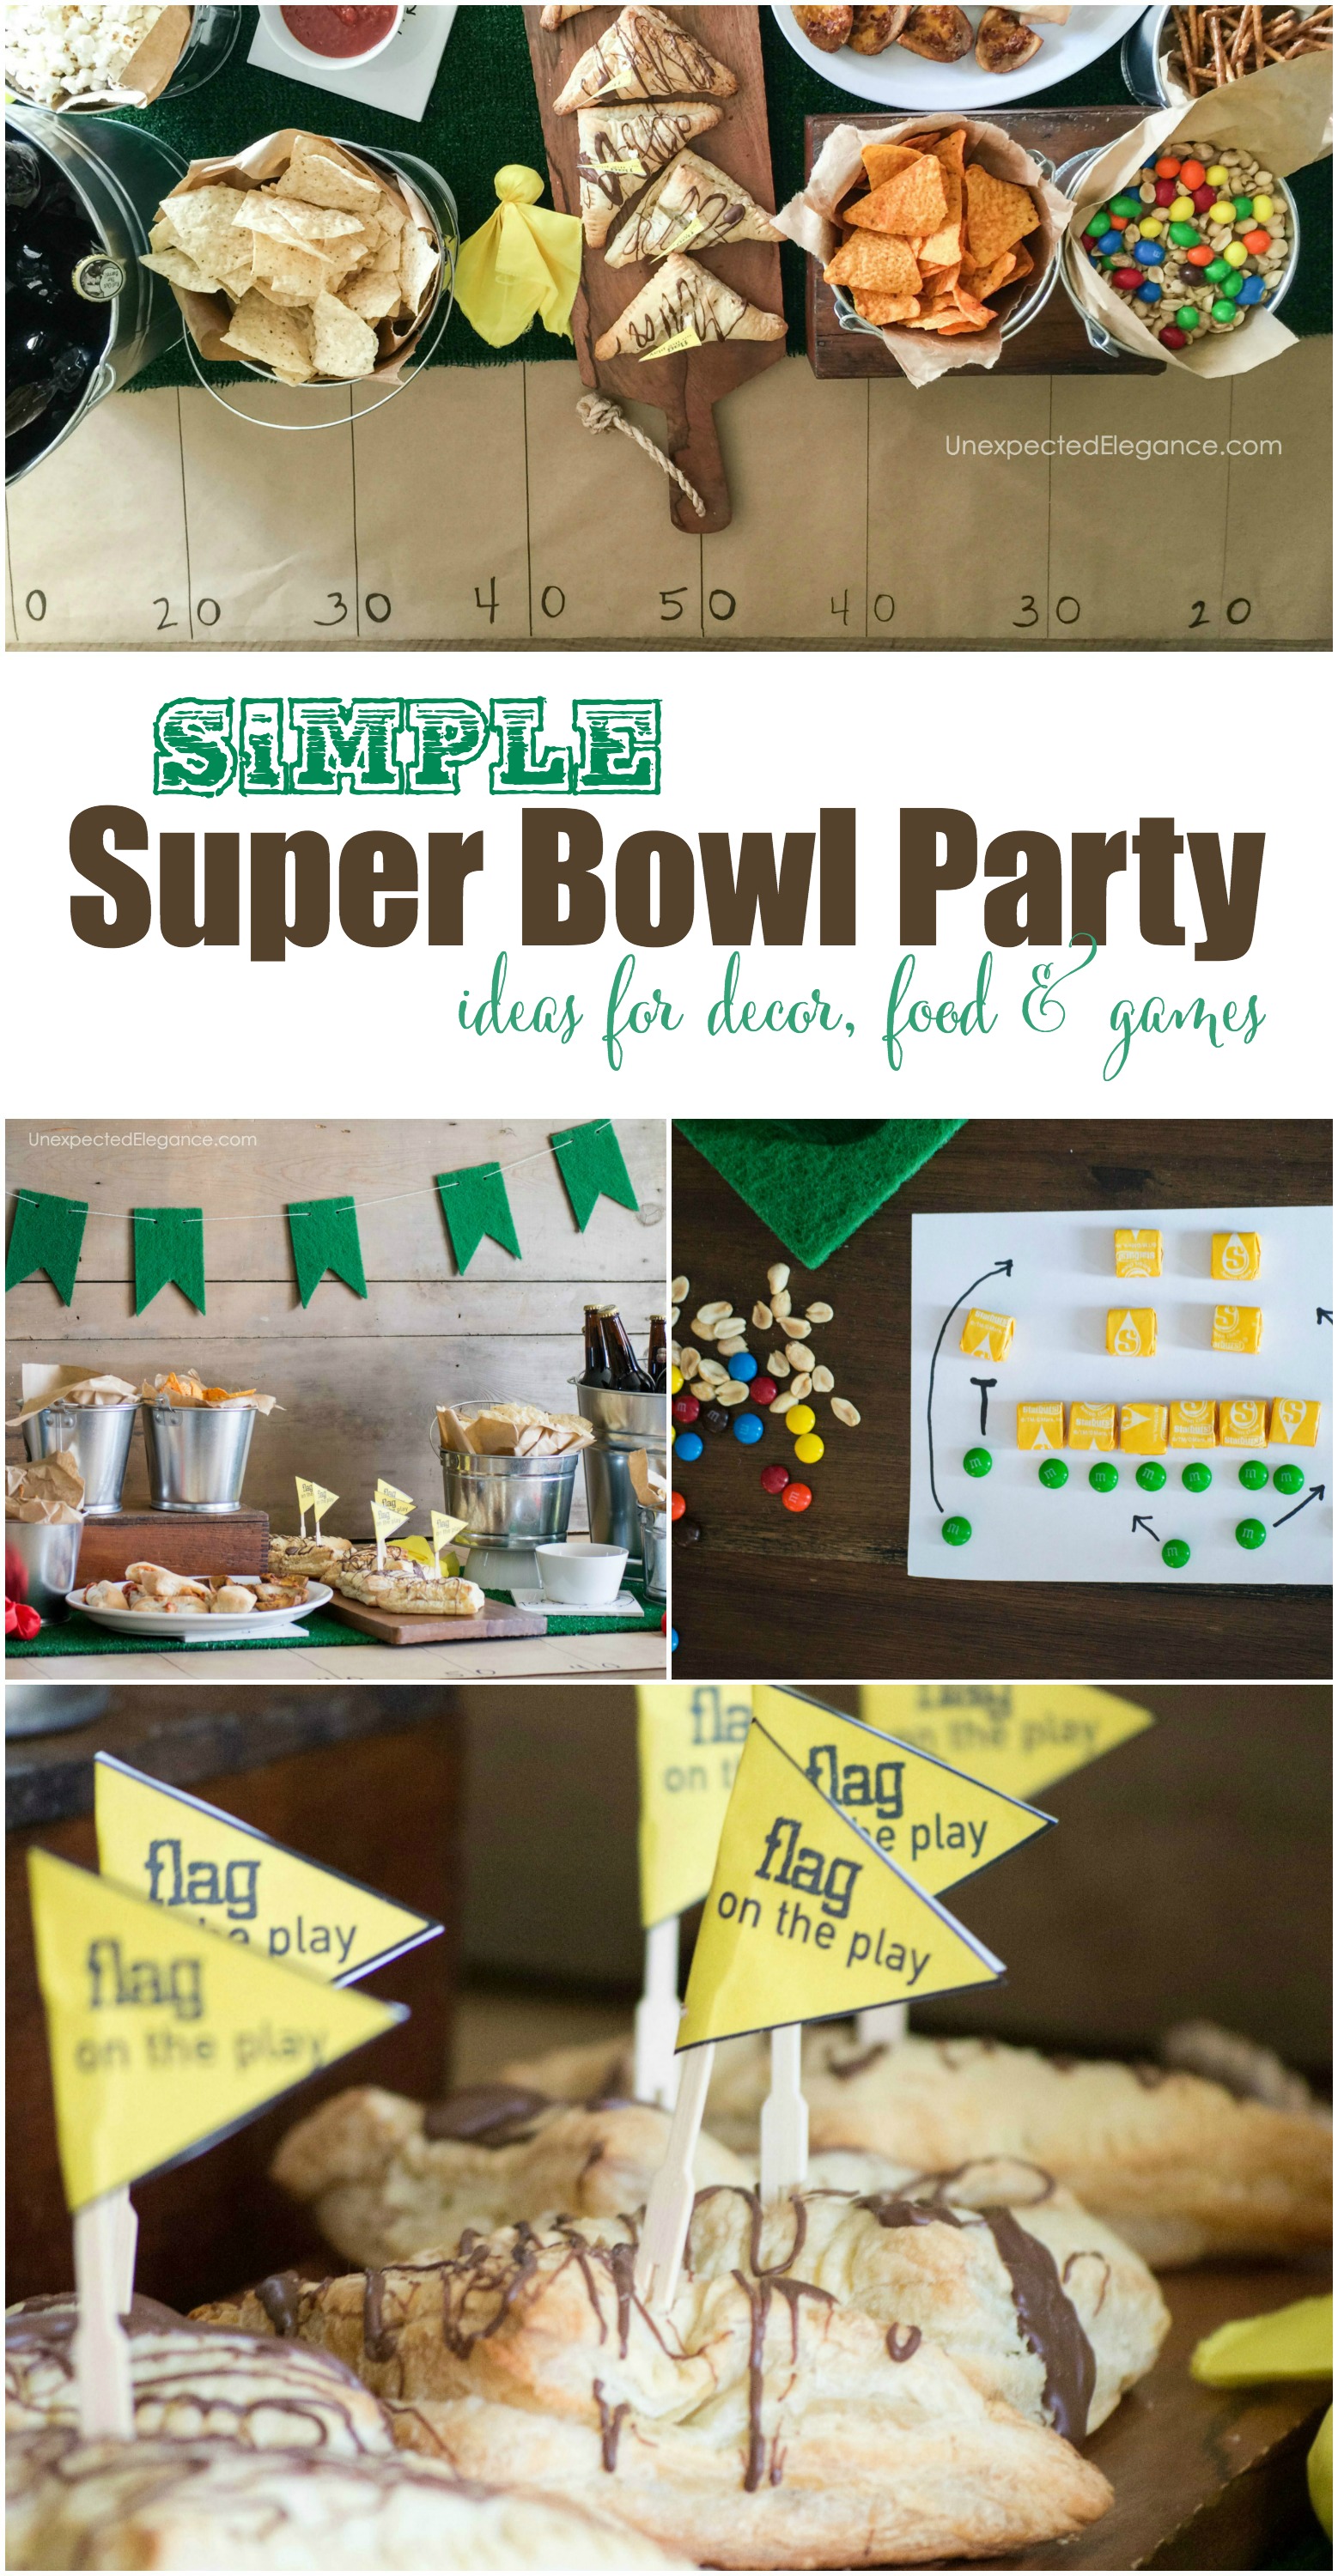 SIMPLE Ideas for a FUN Super Bowl Party | Decor, Food & Games - Unexpected Elegance1558 x 3000